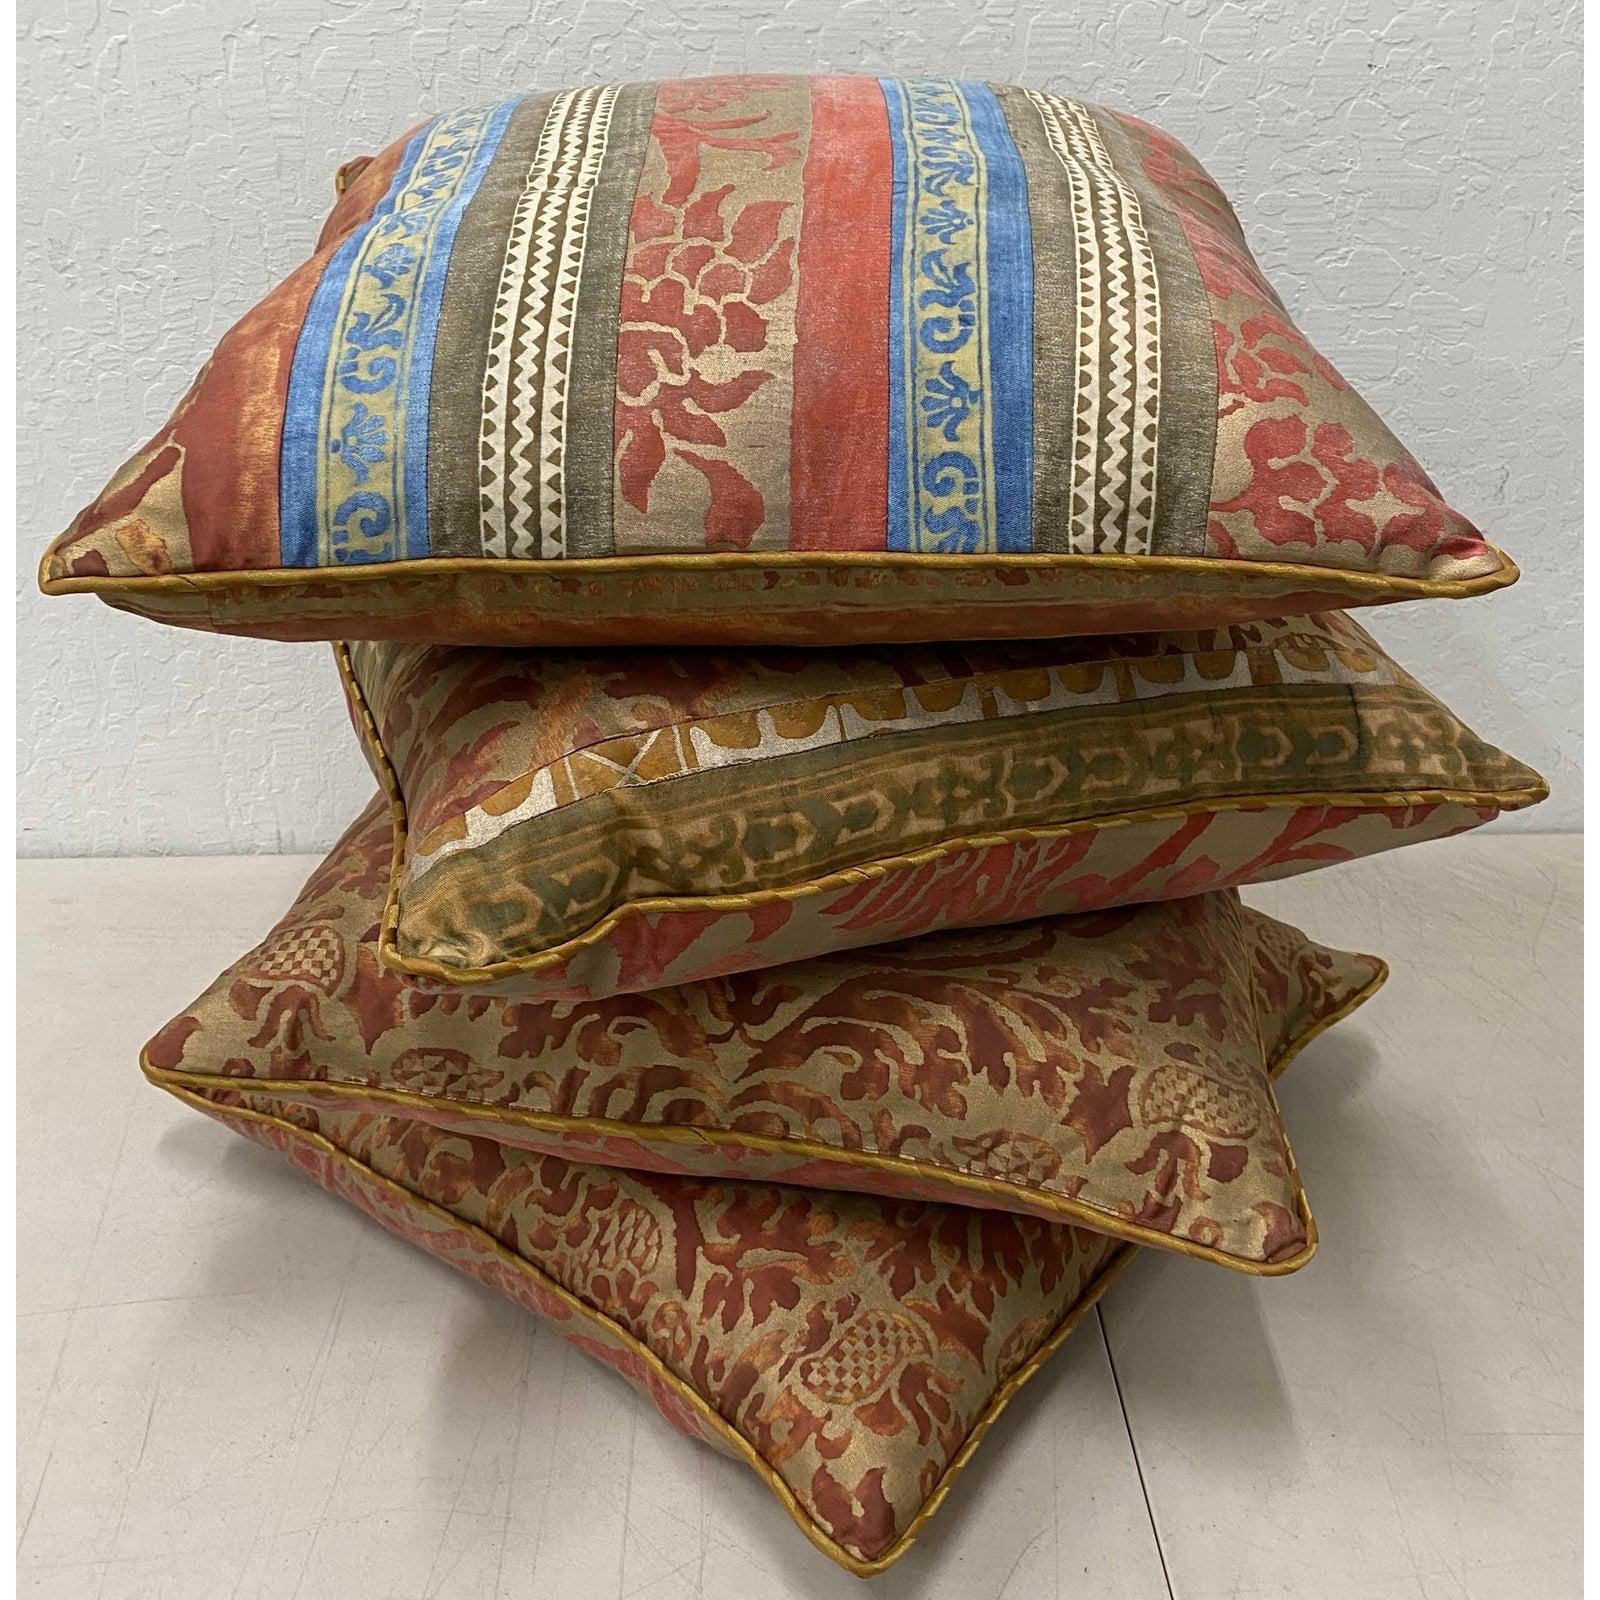 Hand-Crafted Set of Four Fortuny Fabric Cushions / Pillows